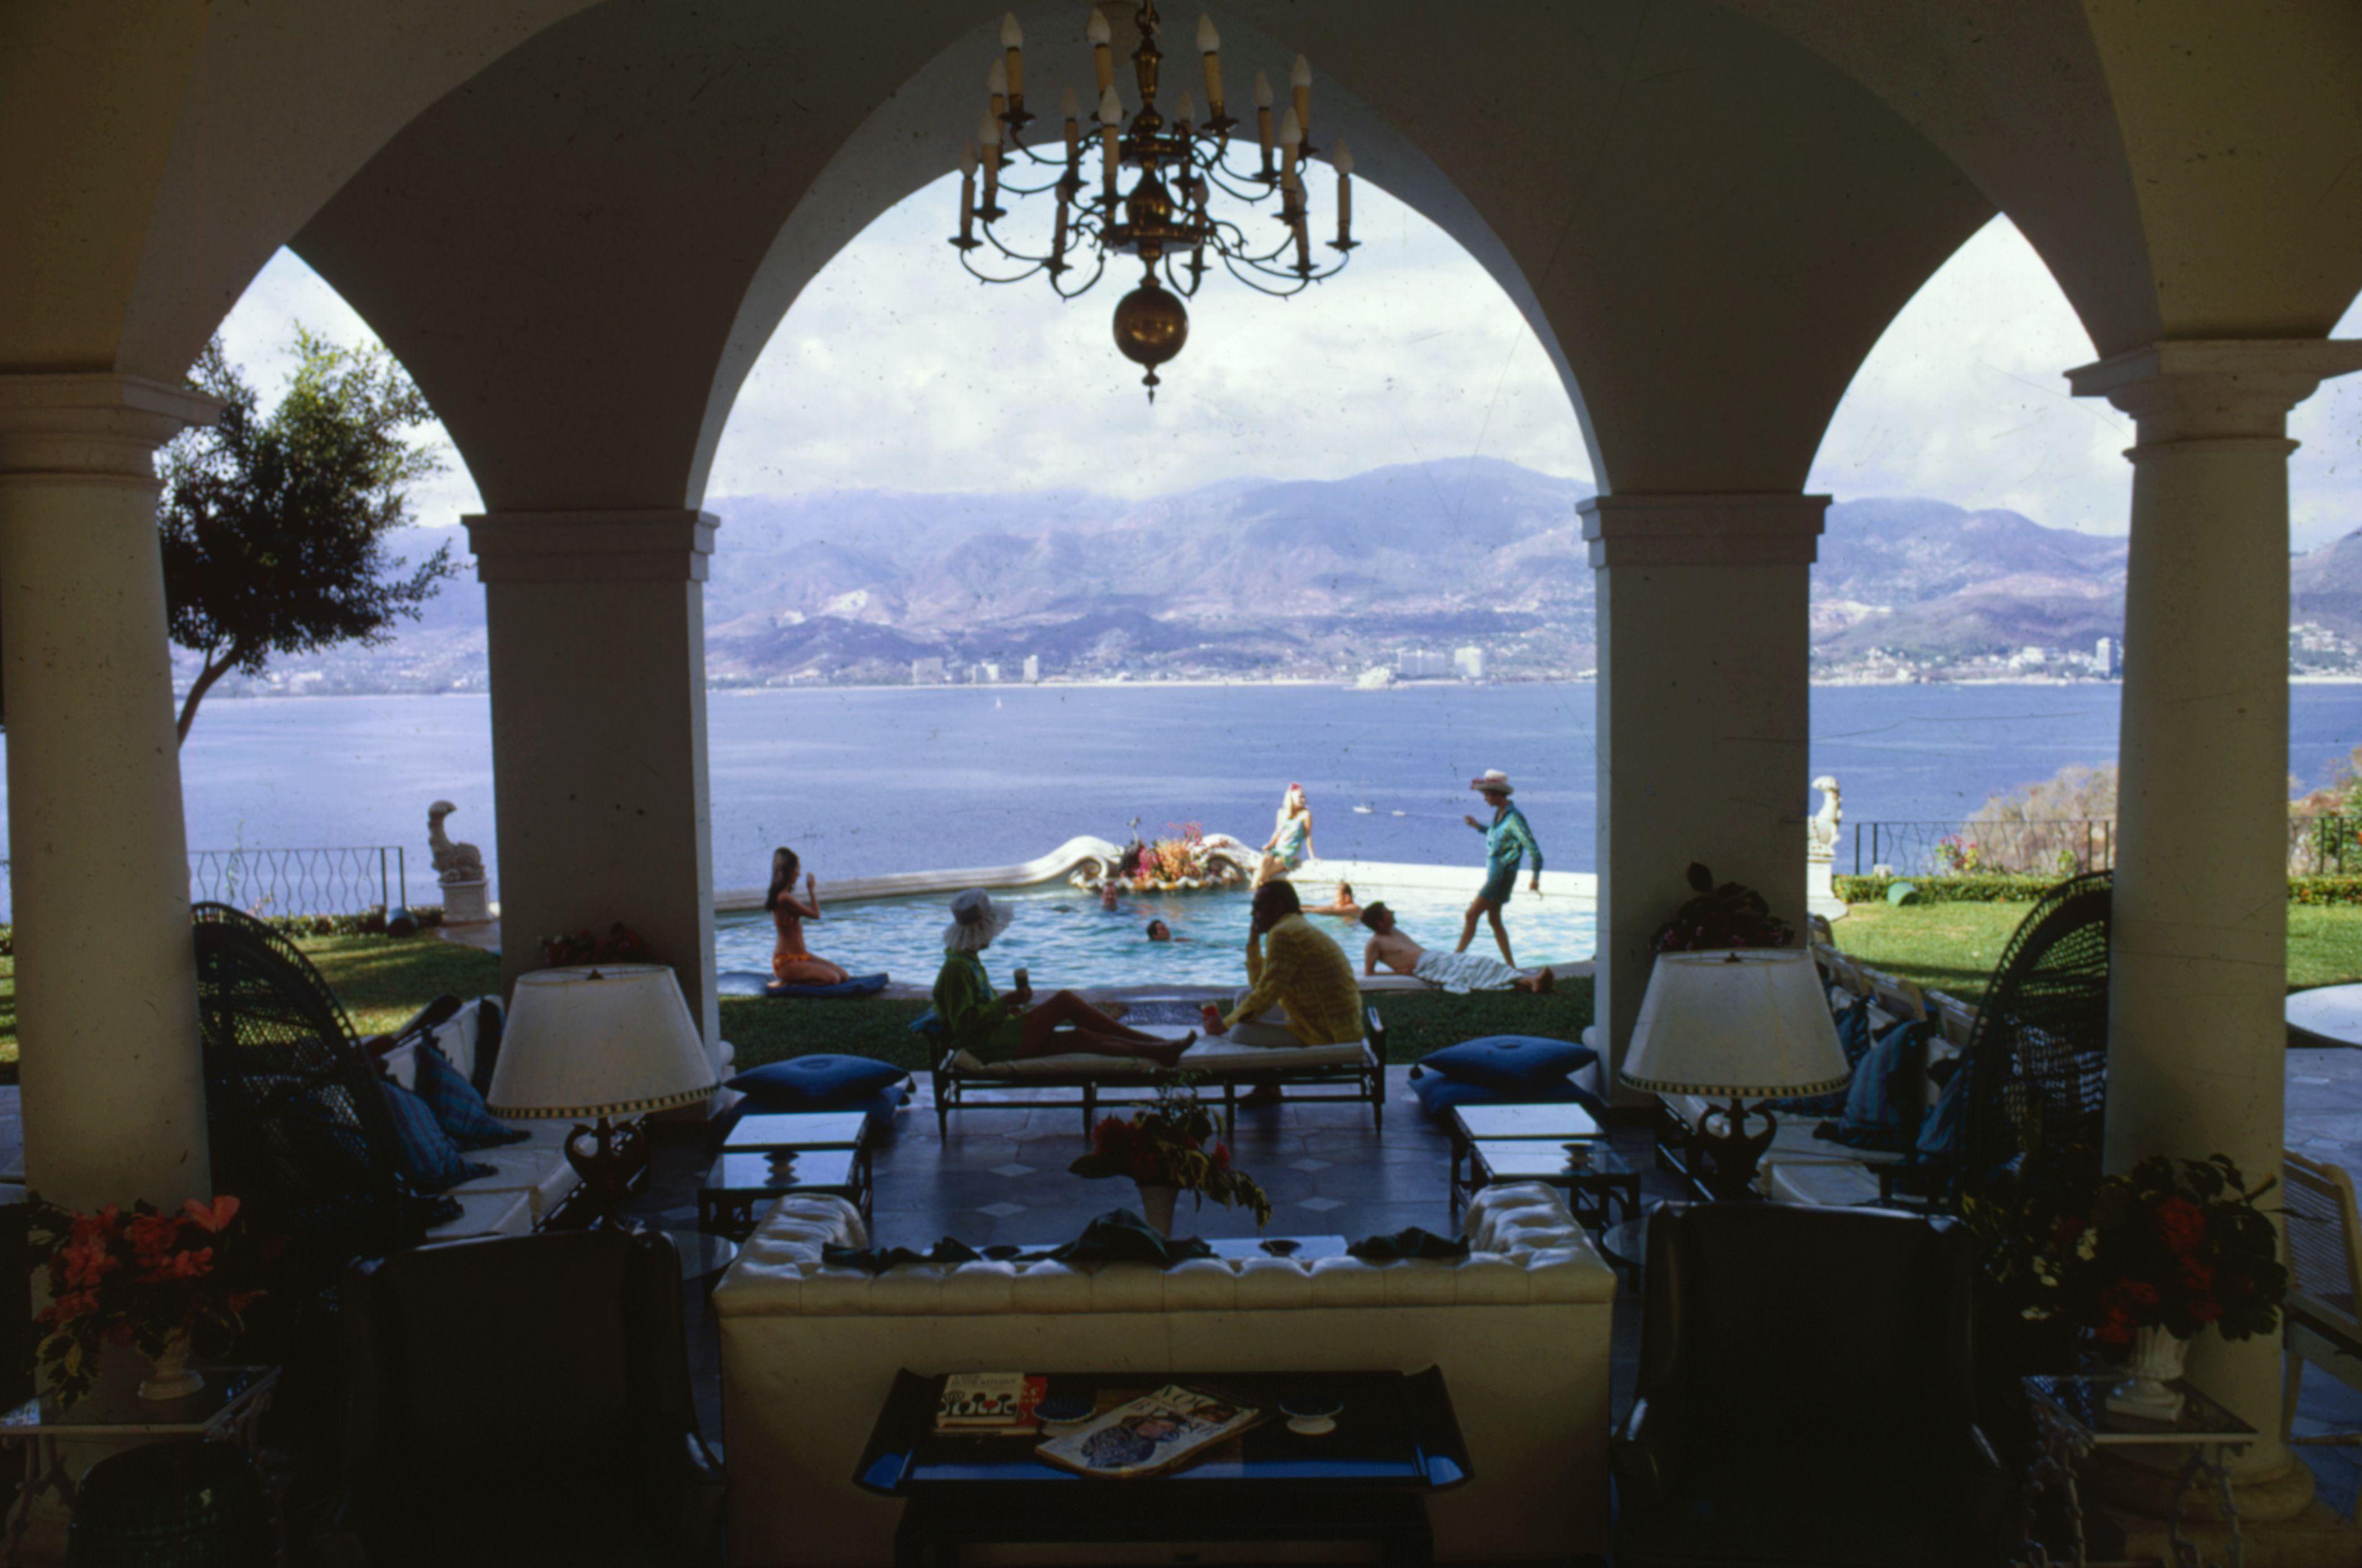 'Acapulco Villa' 1968 Slim Aarons Limited Estate Edition Print 
Las Brisas, the home of Eustaquio Escandon in Acapulco, January 1968. 
From 'A Wonderful Time - Slim Aarons' 
(Photo by Slim Aarons/Getty Images)

Slim Aarons Chromogenic C print